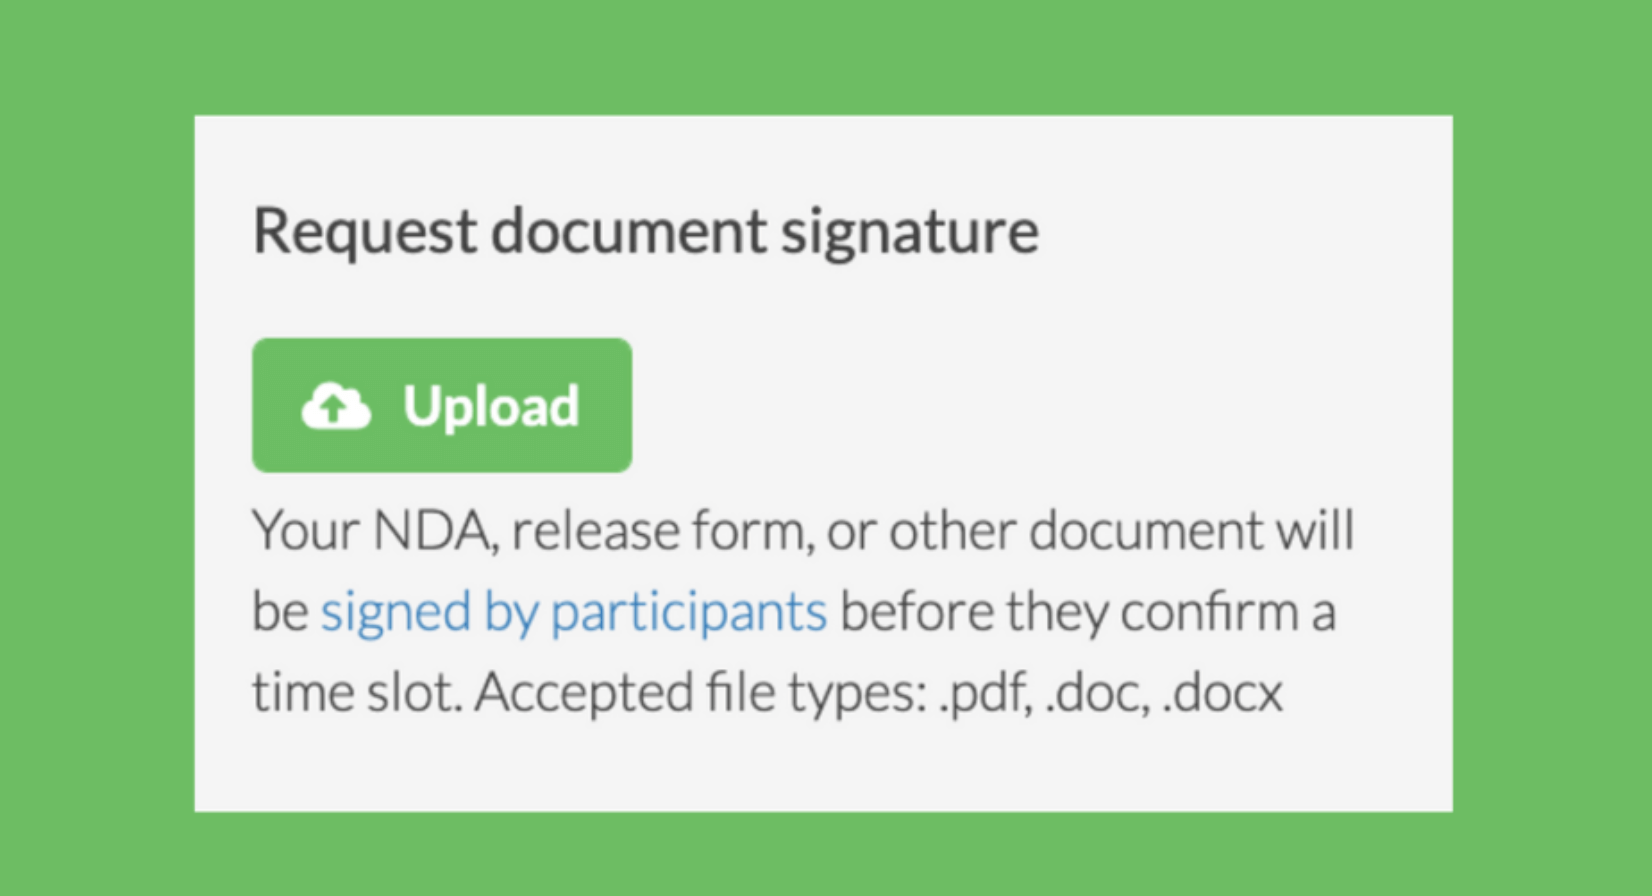 How we built this: User Interviews’ Document Signing feature